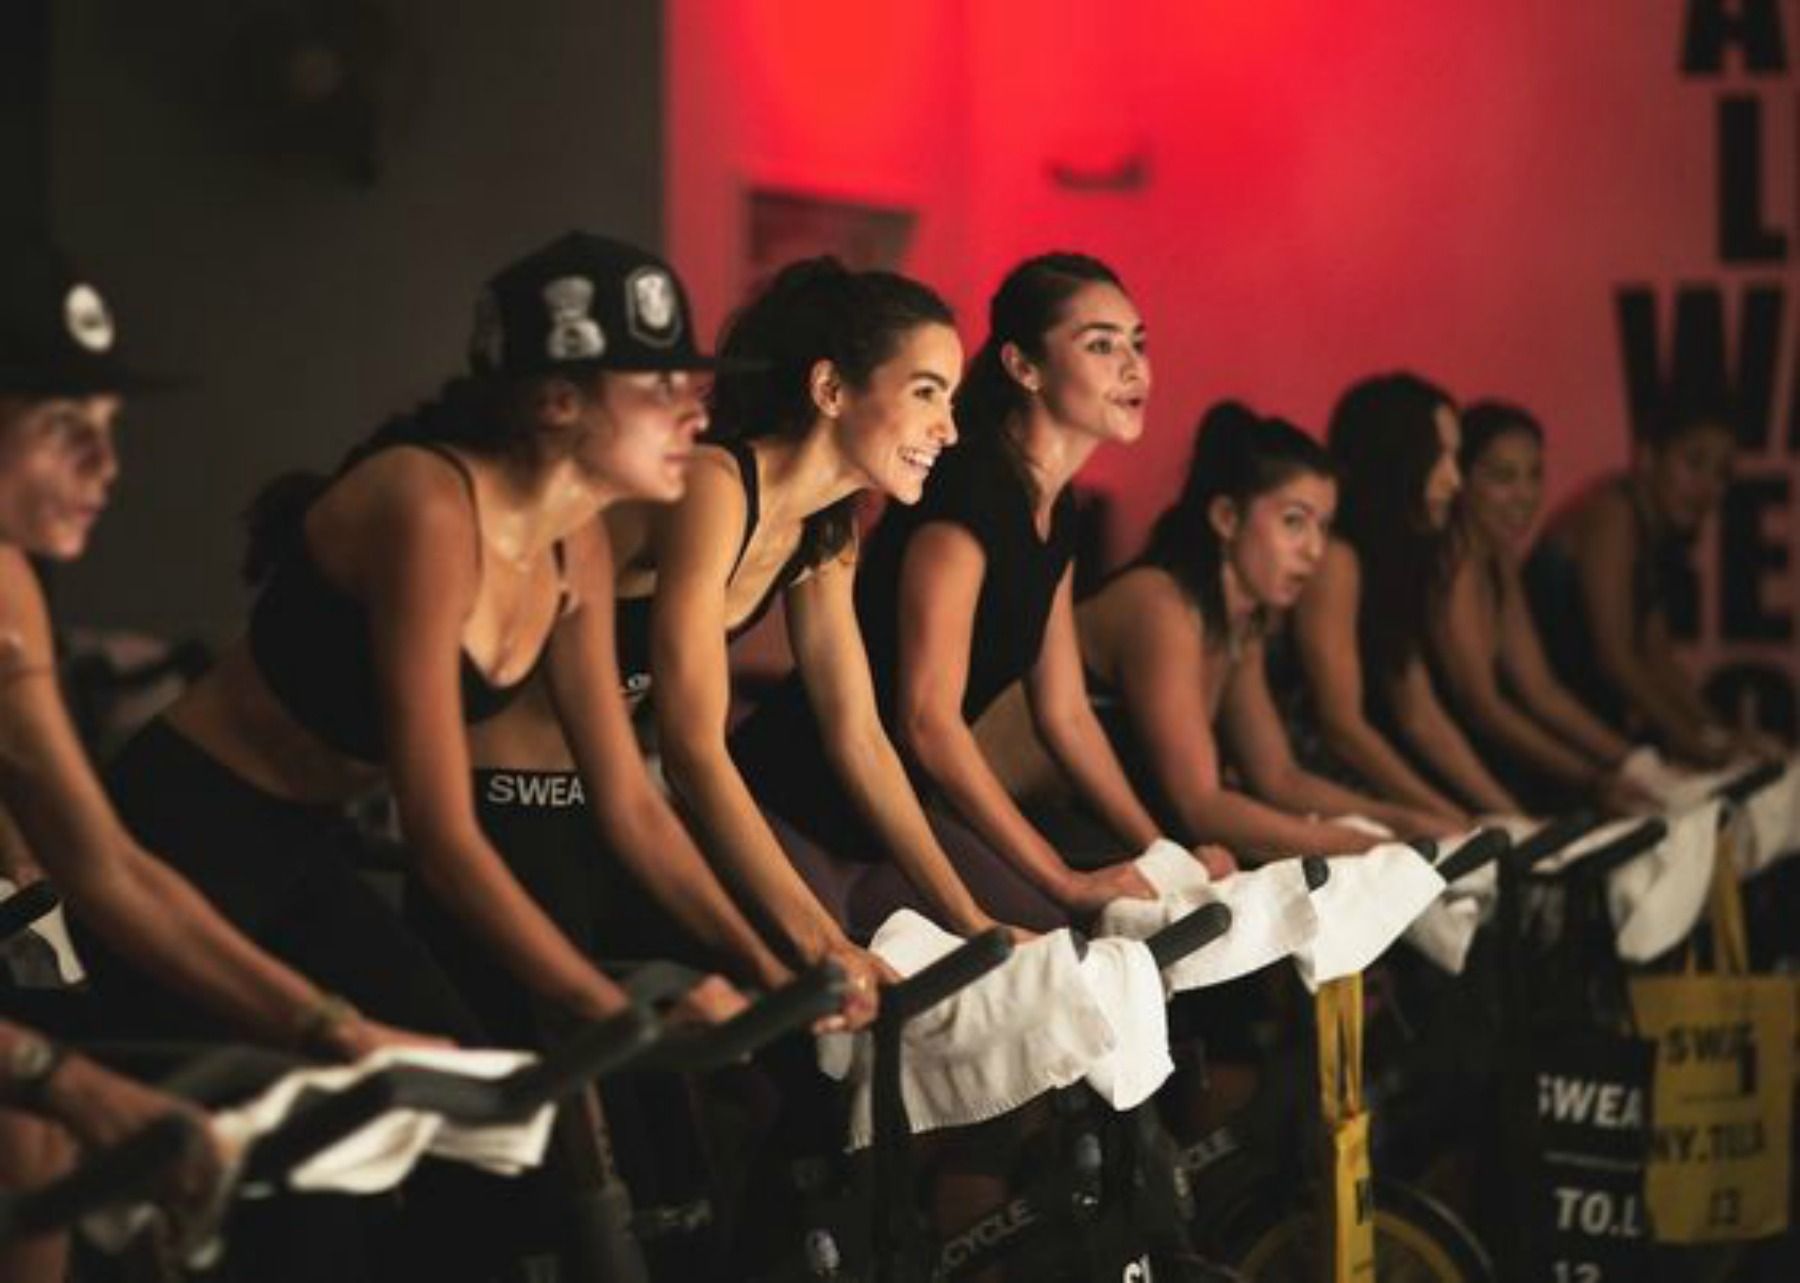 Soulcycle, lo spinning motivazionale a lume di candela